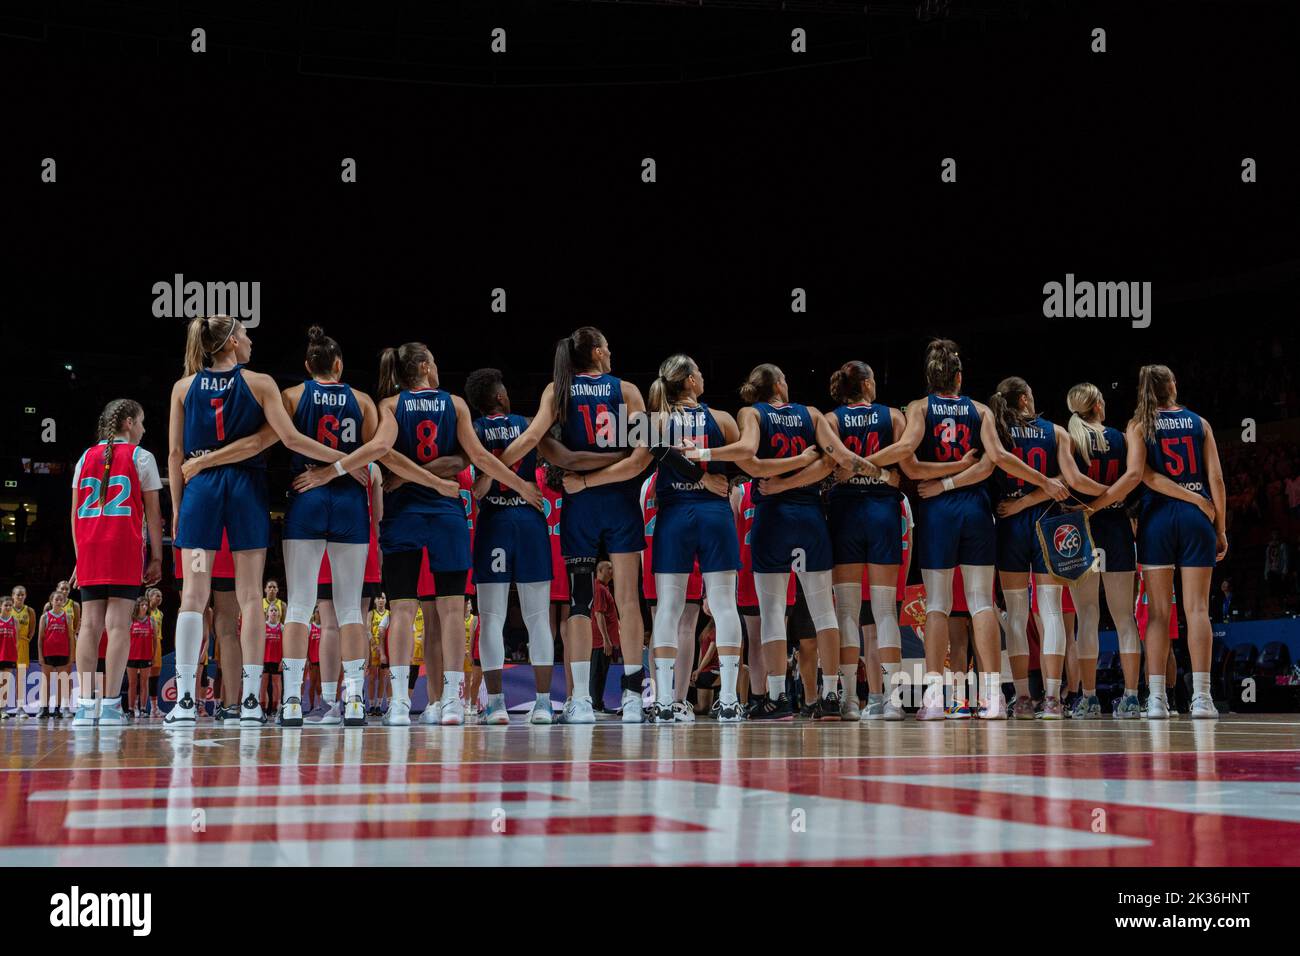 Sydney, Australia. 25th Sep, 2022. The Serbian national team during the national anthem ahead of the FIBA Womens World Cup 2022 game between Australia and Serbia at the Sydney Superdome in Sydney, Australia. (Foto: Noe Llamas/Sports Press Photo/C - ONE HOUR DEADLINE - ONLY ACTIVATE FTP IF IMAGES LESS THAN ONE HOUR OLD - Alamy) Credit: SPP Sport Press Photo. /Alamy Live News Stock Photo